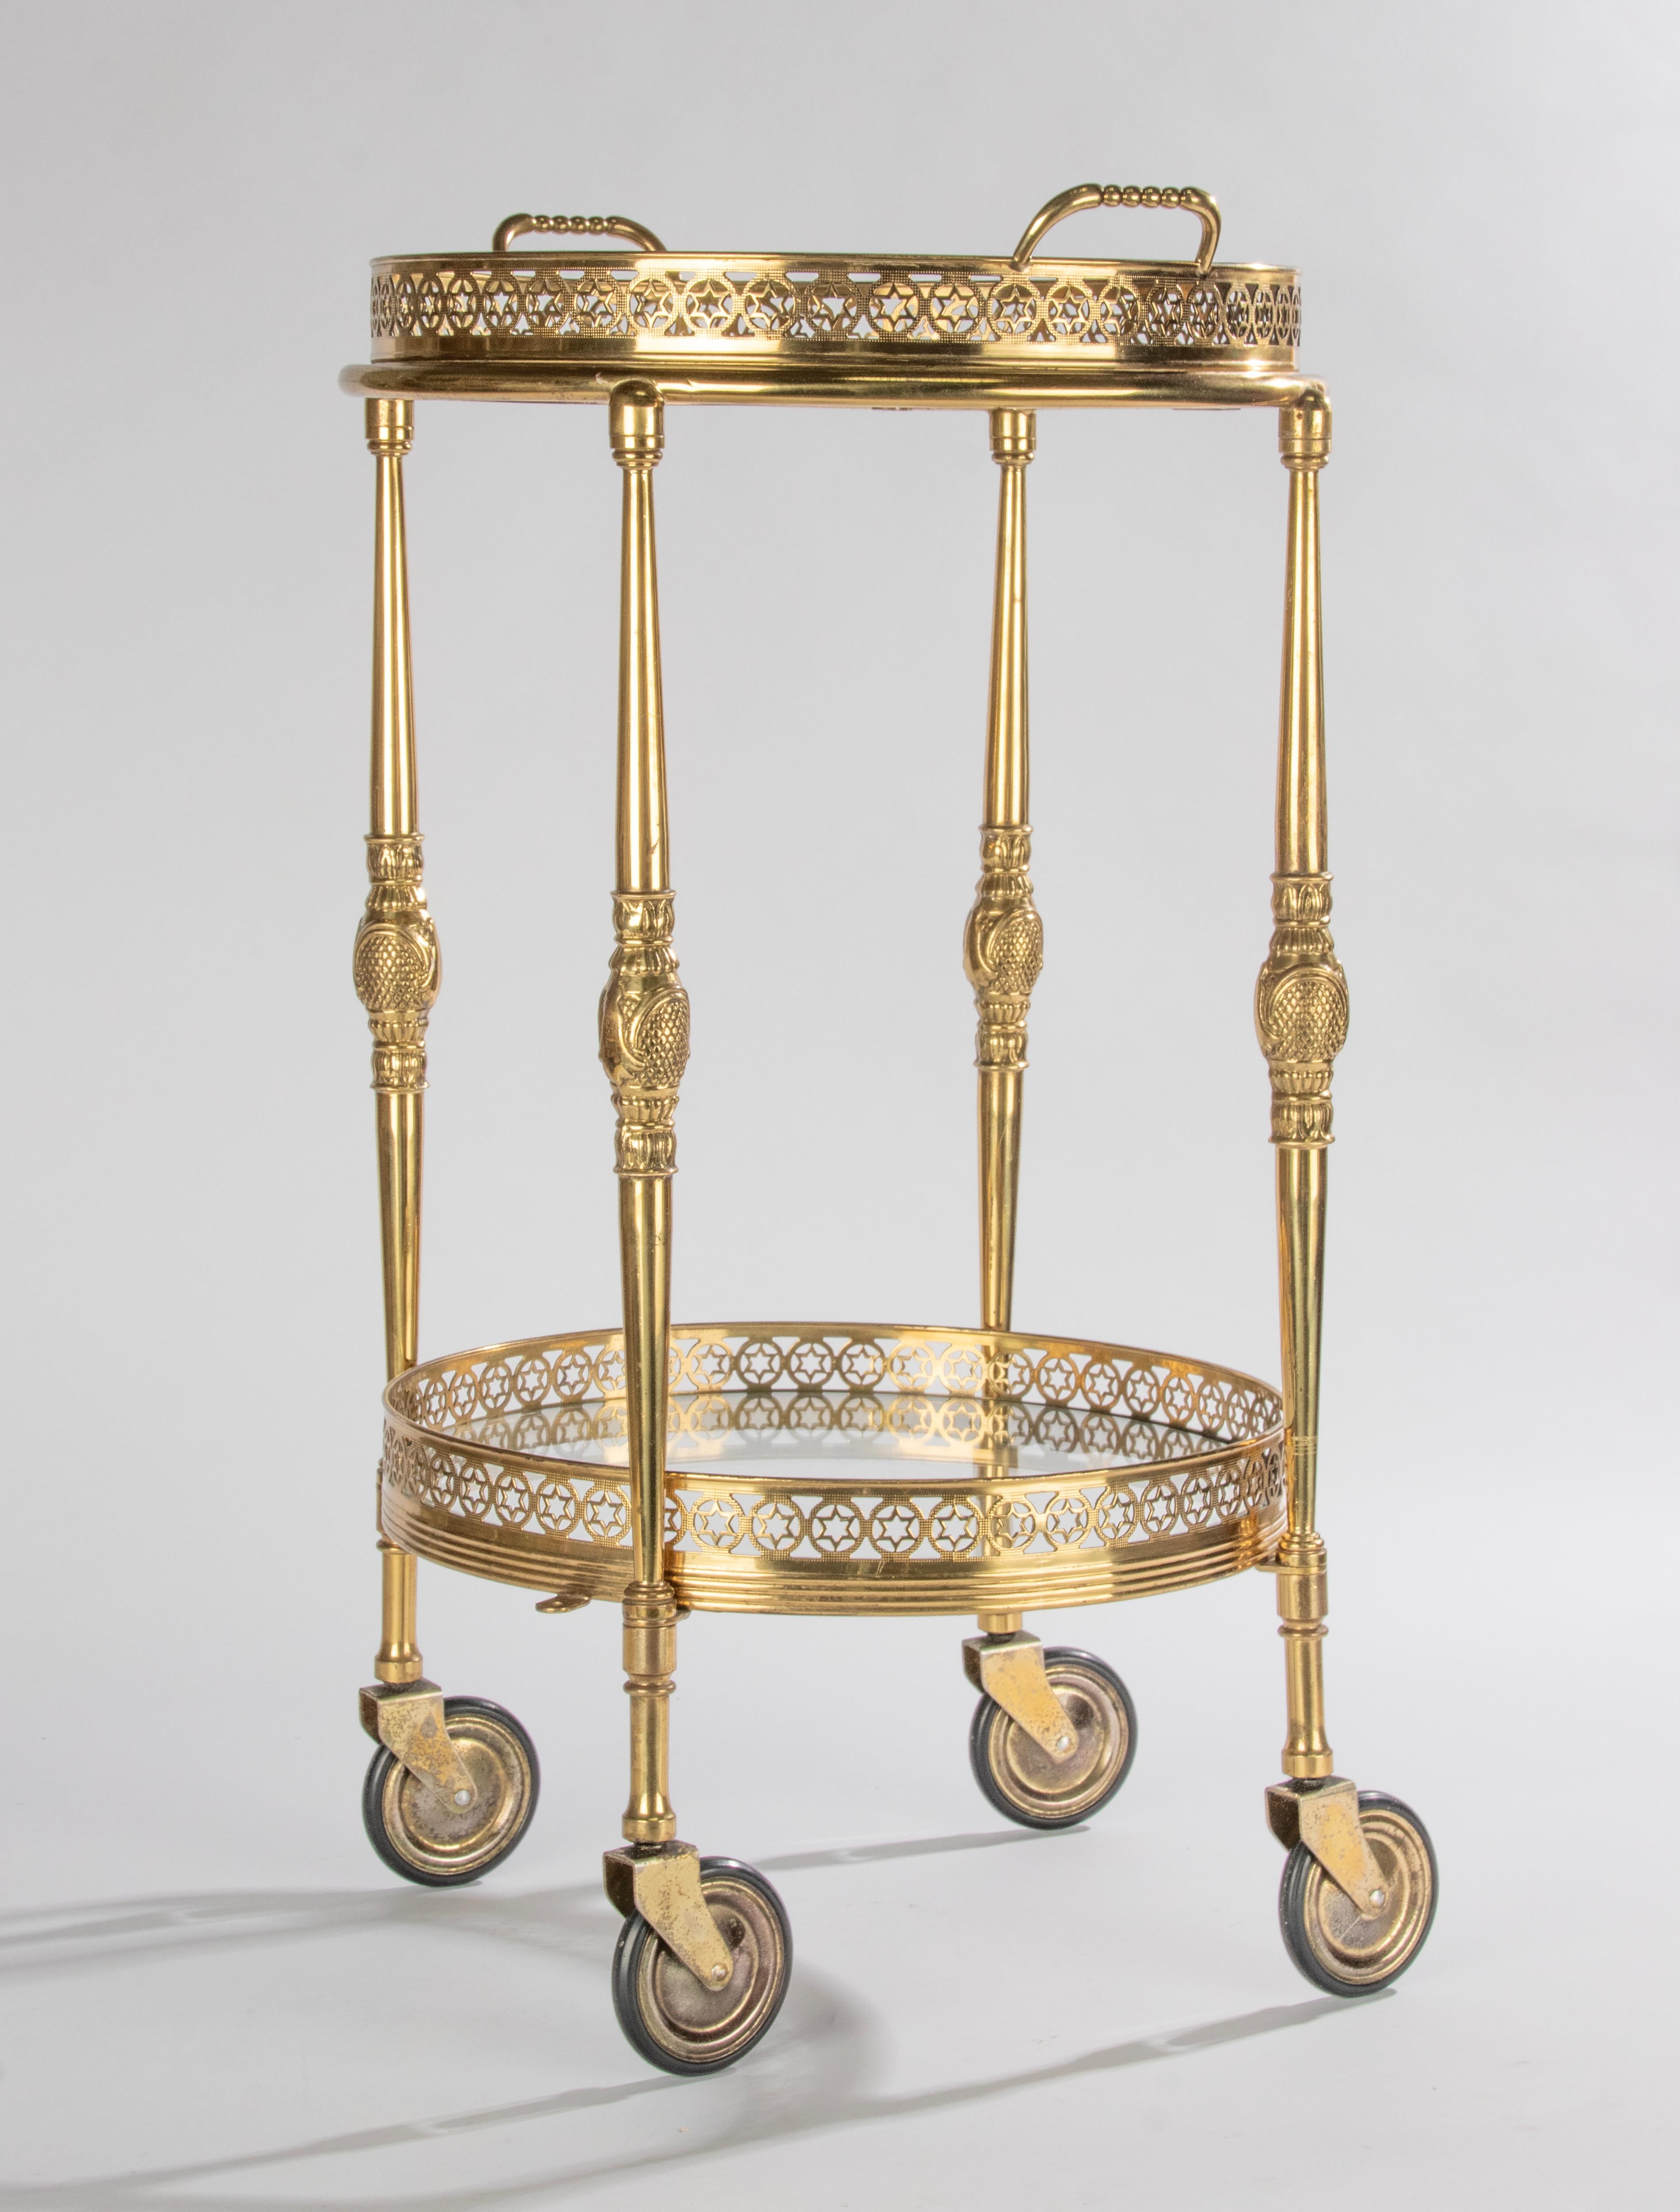 Elegant bar cart with two tiers, in the style of Maison Baguès. The trolley is made of brass colored metal and glass, with beautiful refined details, such as the openwork gallery edges. The top tray is removable and can be used separately. The